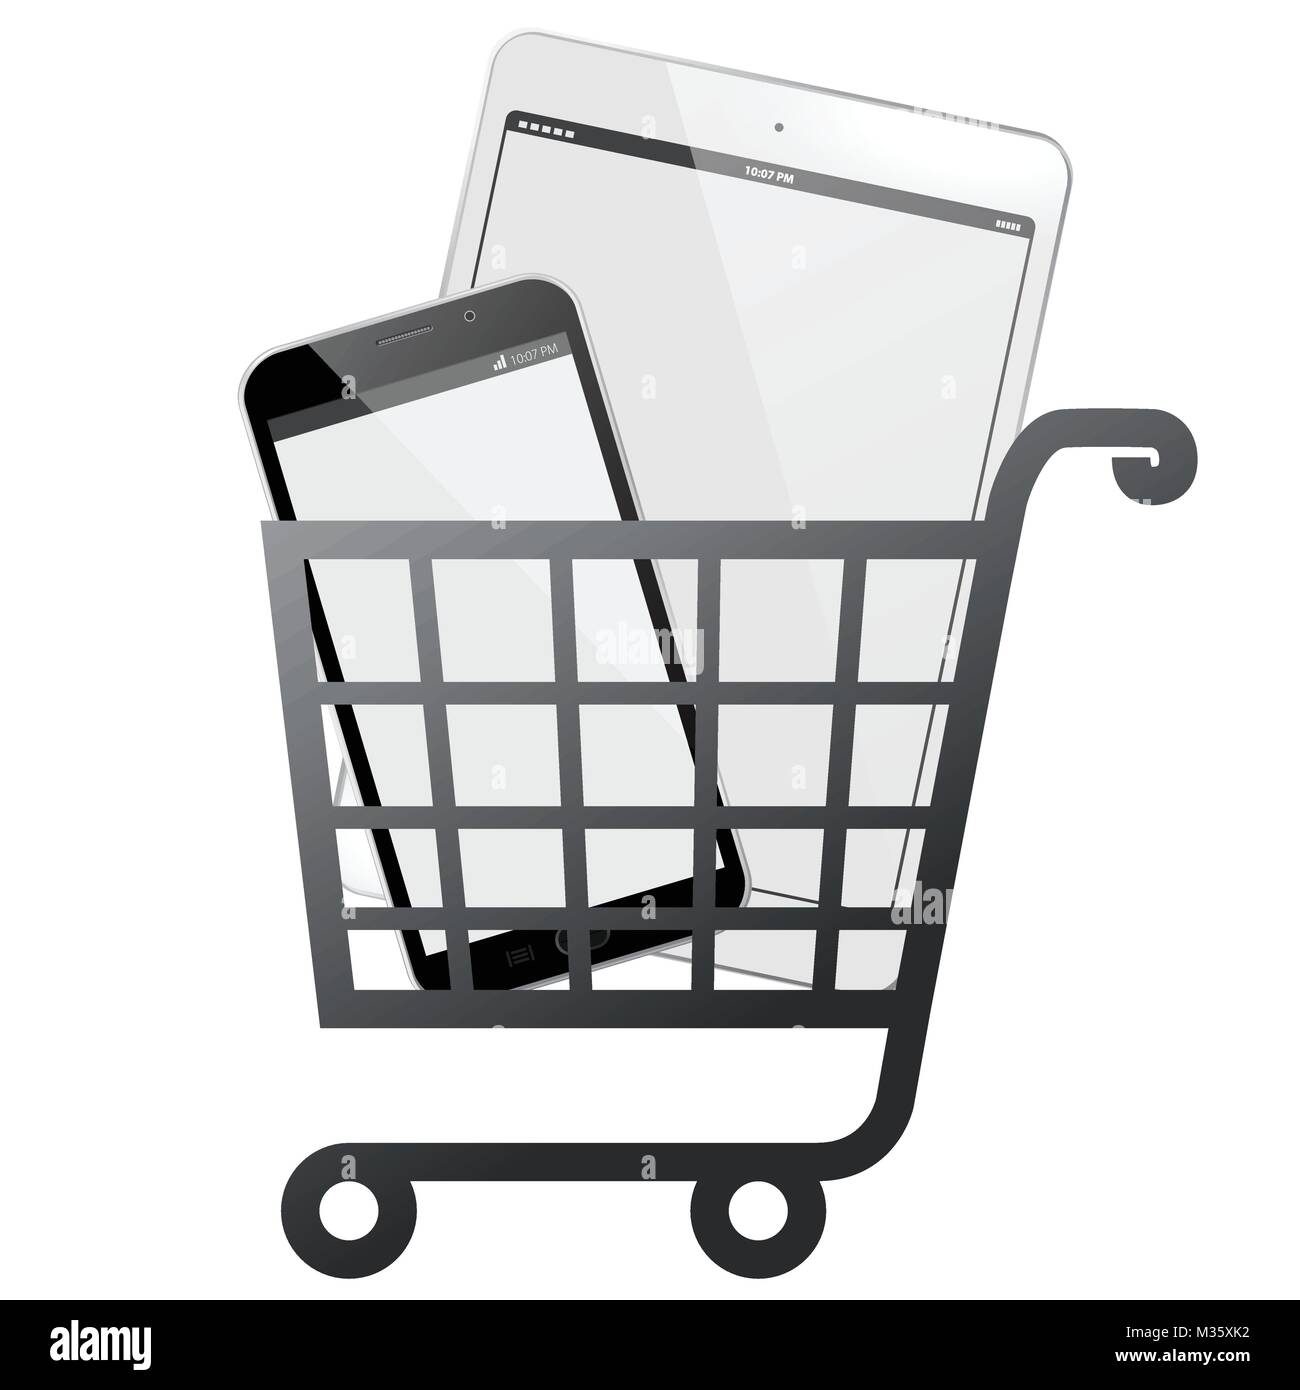 Mobile Devices with Shopping Cart Vector illustration Stock Vector